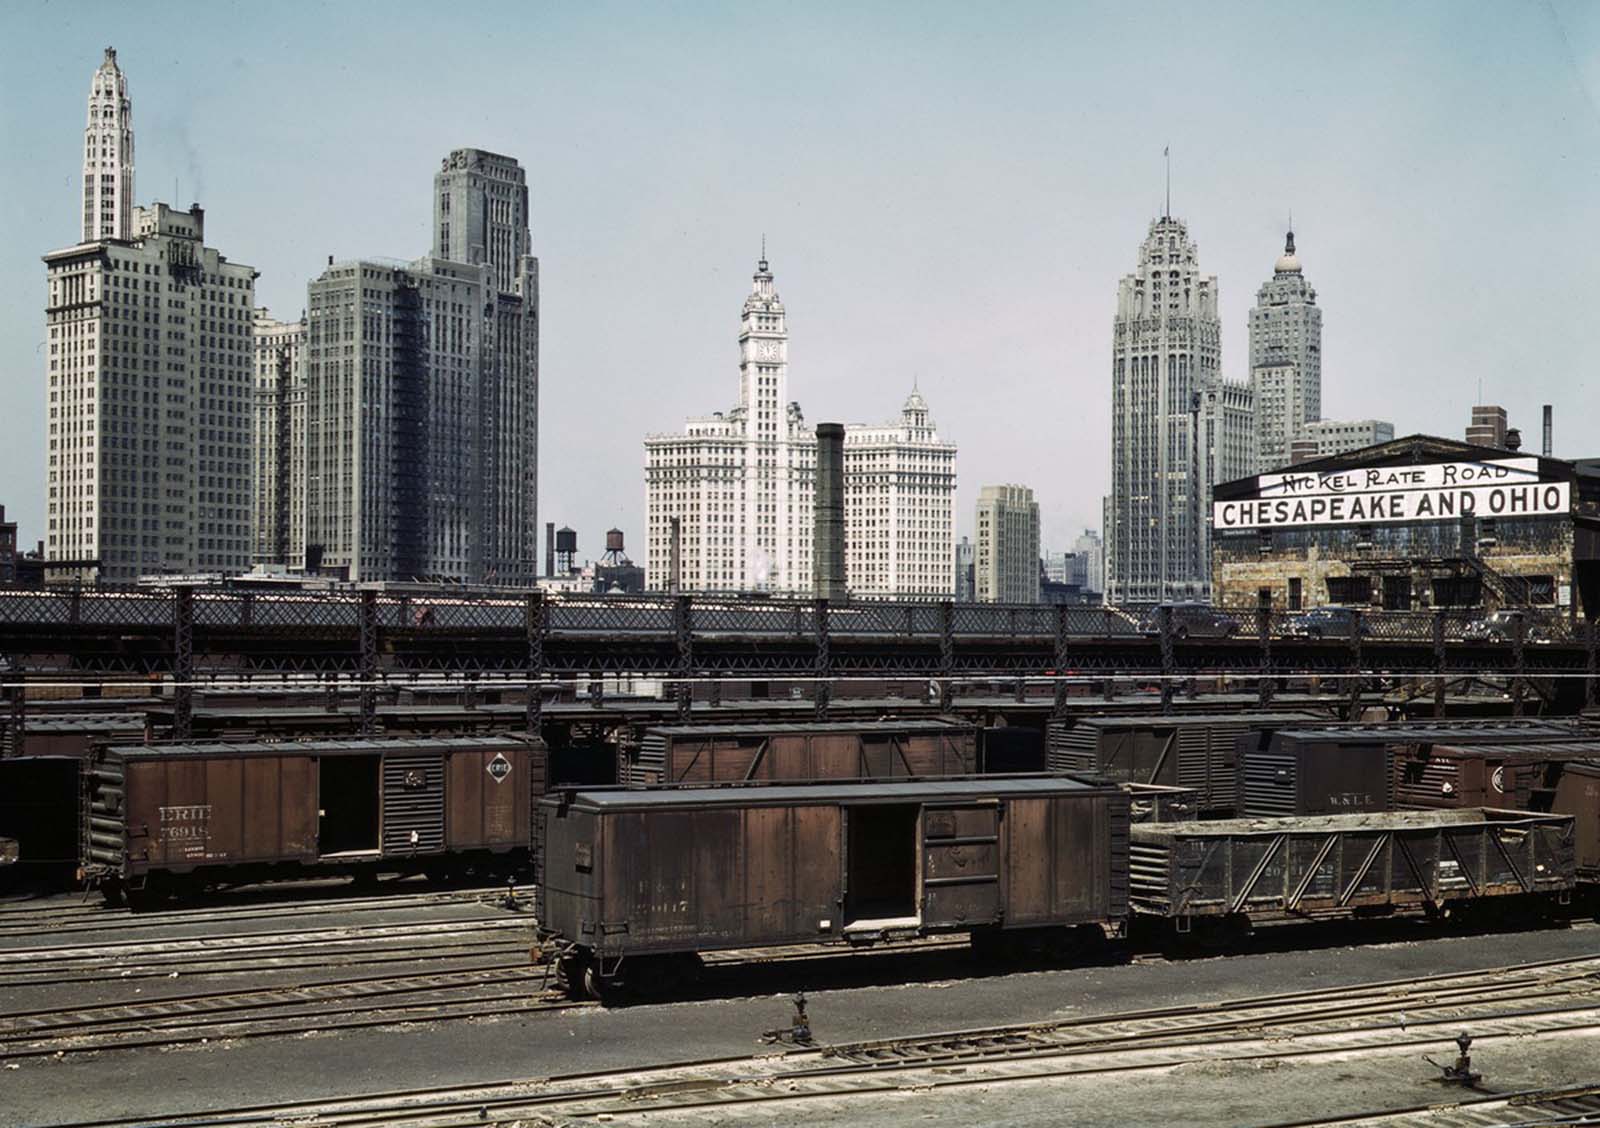 Illinois Central Railroad freight cars at the South Water Street freight terminal in Chicago in April 1943.